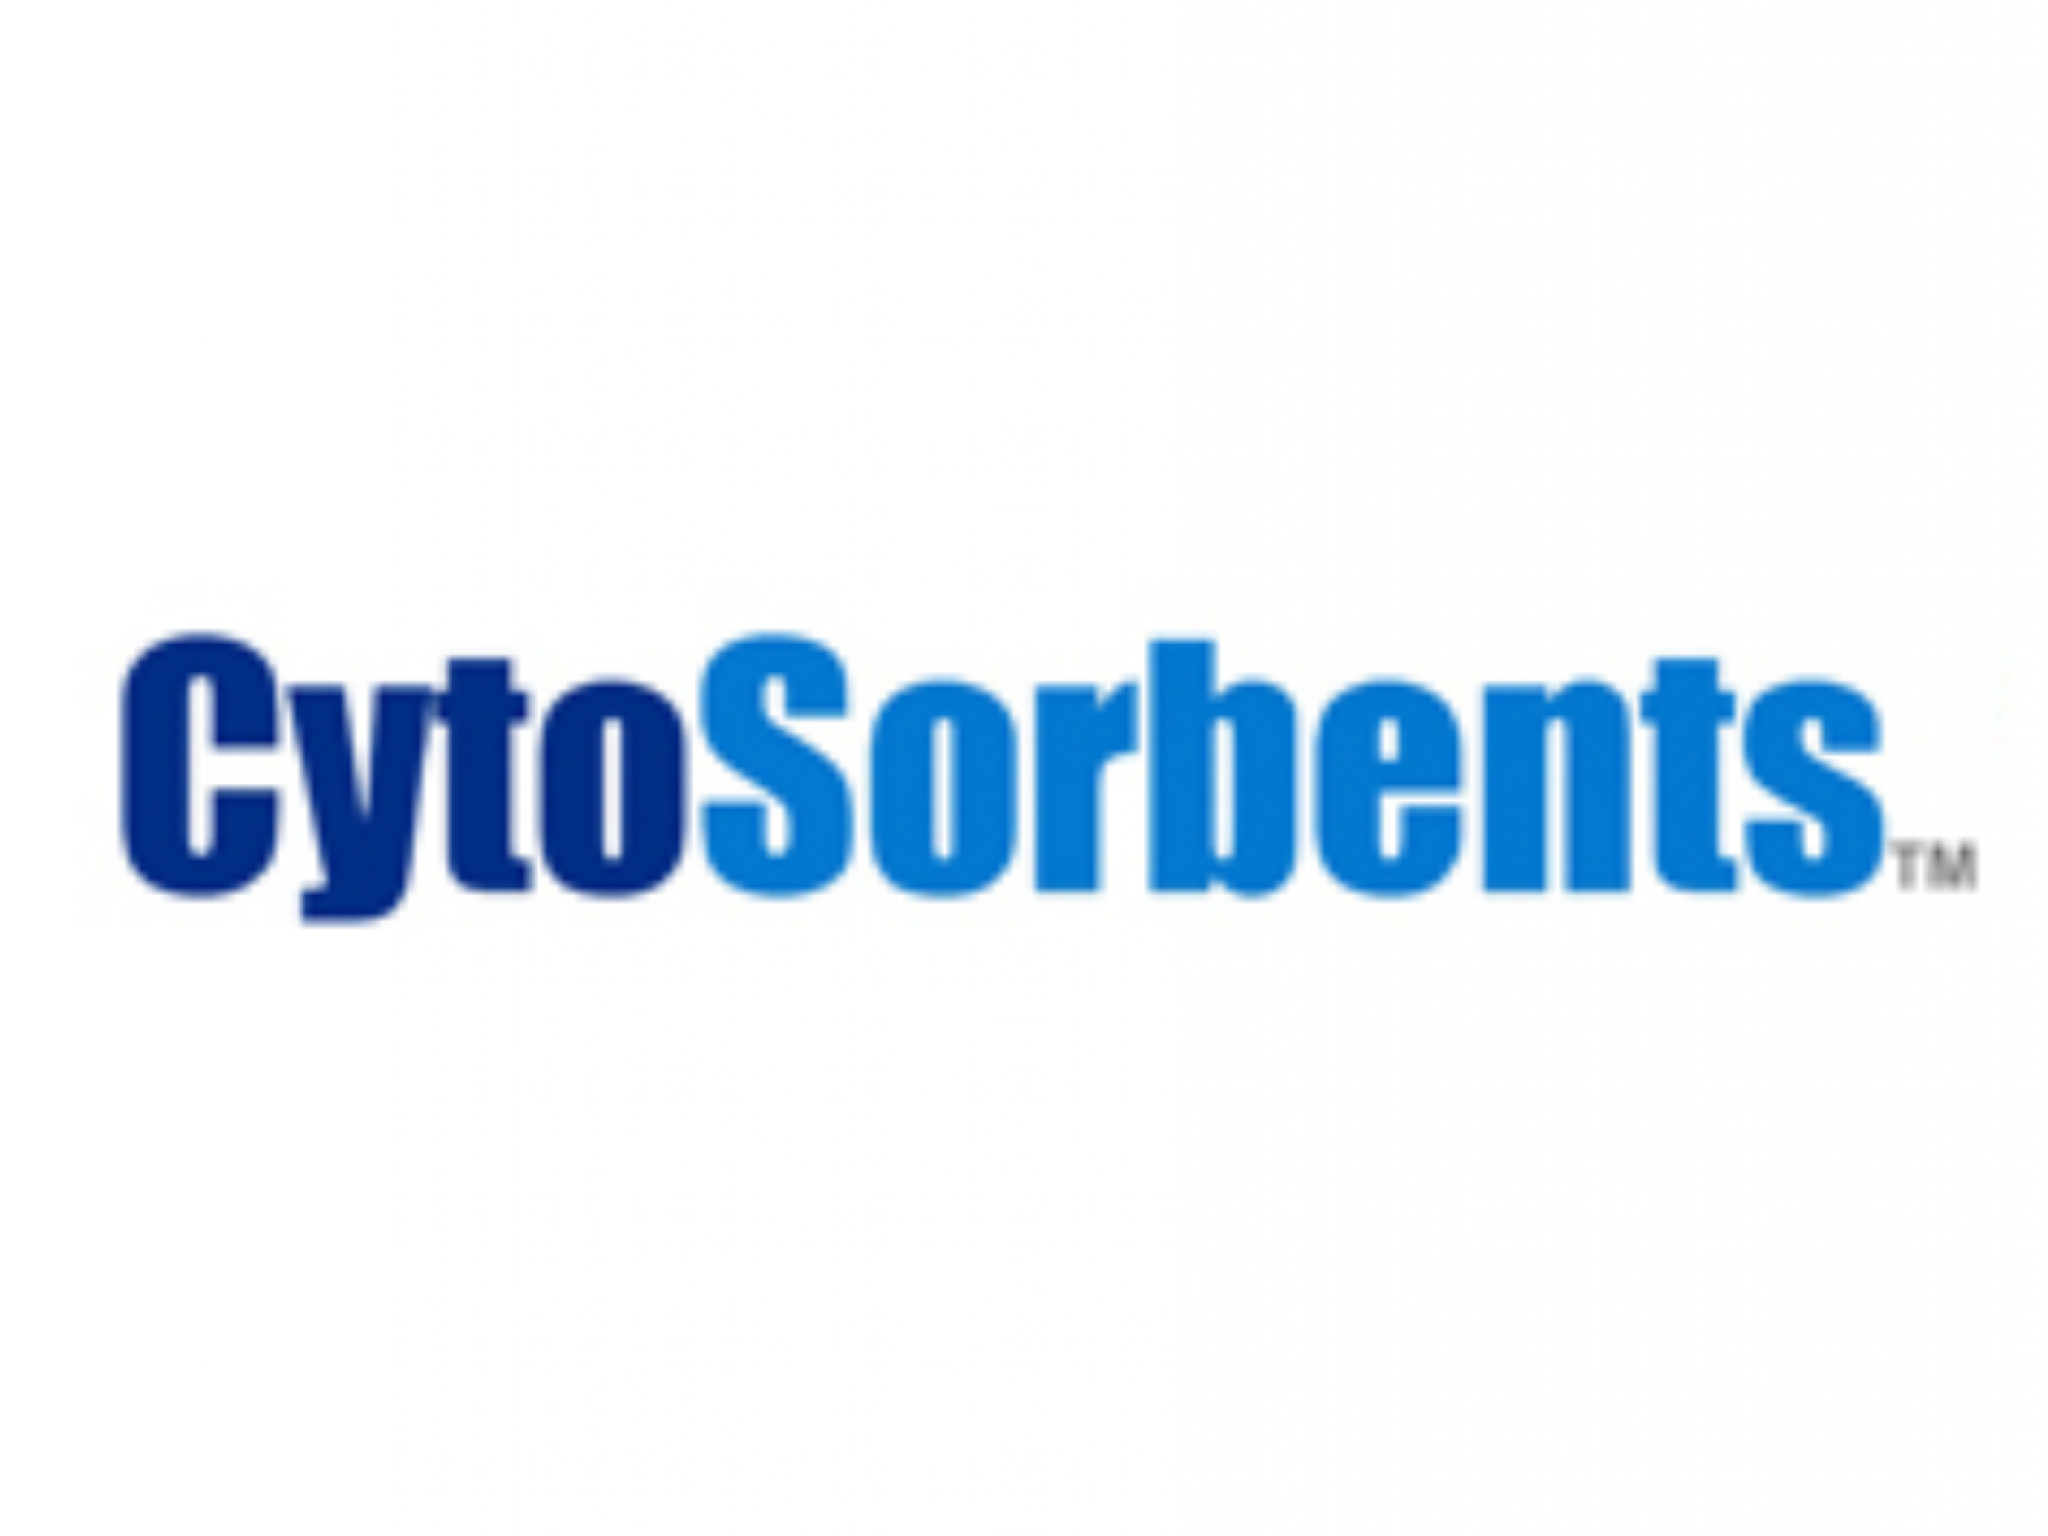  why-is-blood-purification-focused-cytosorbents-trading-lower-today 